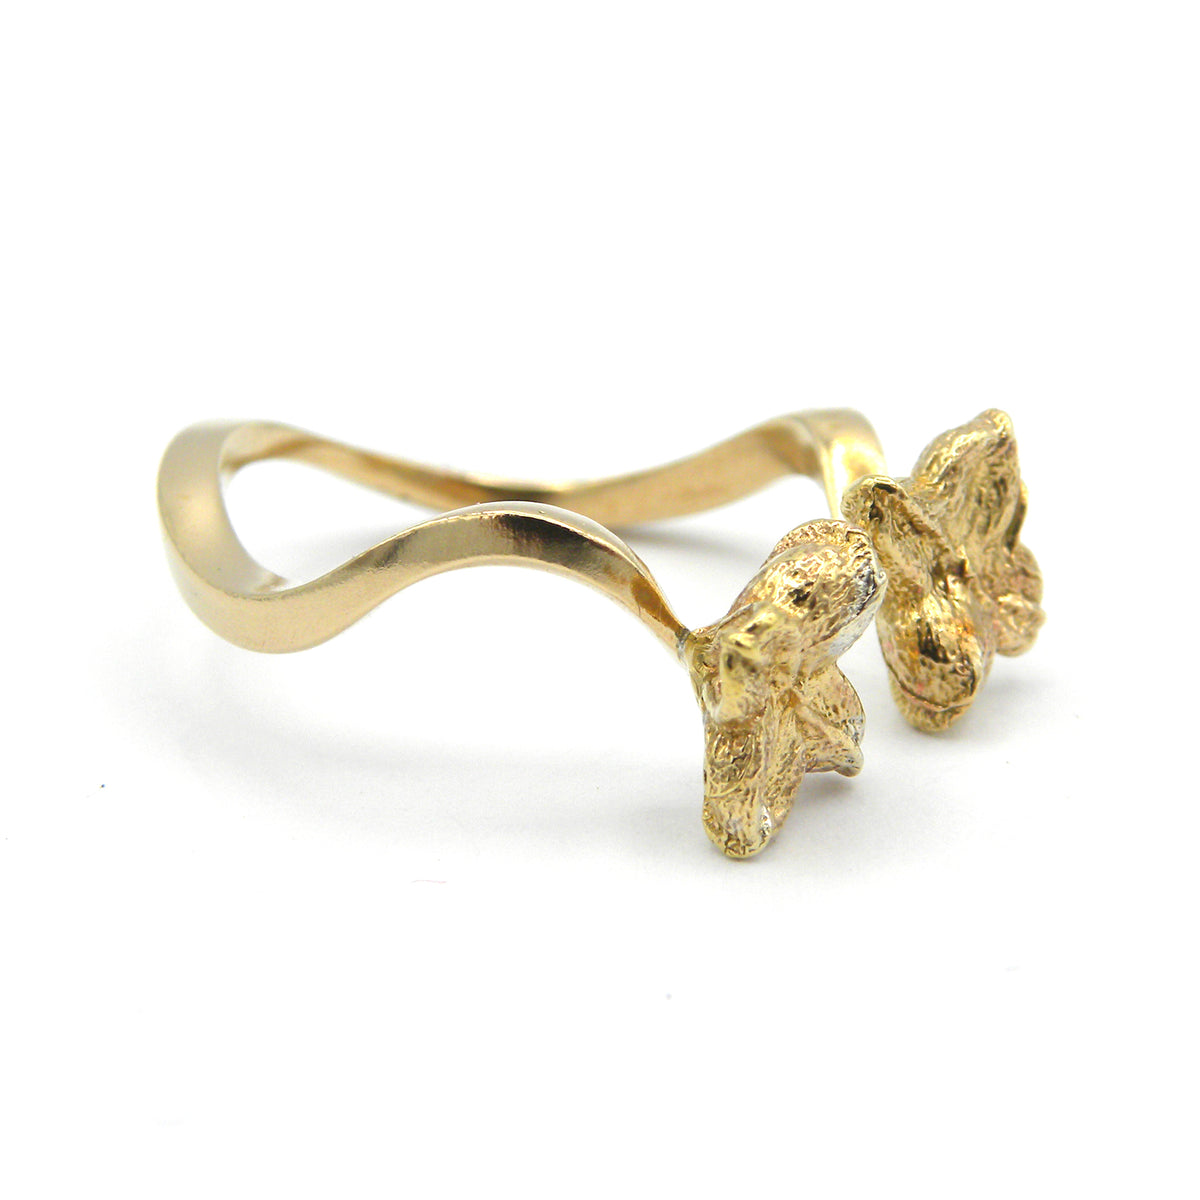 Bronze ring with flower berries